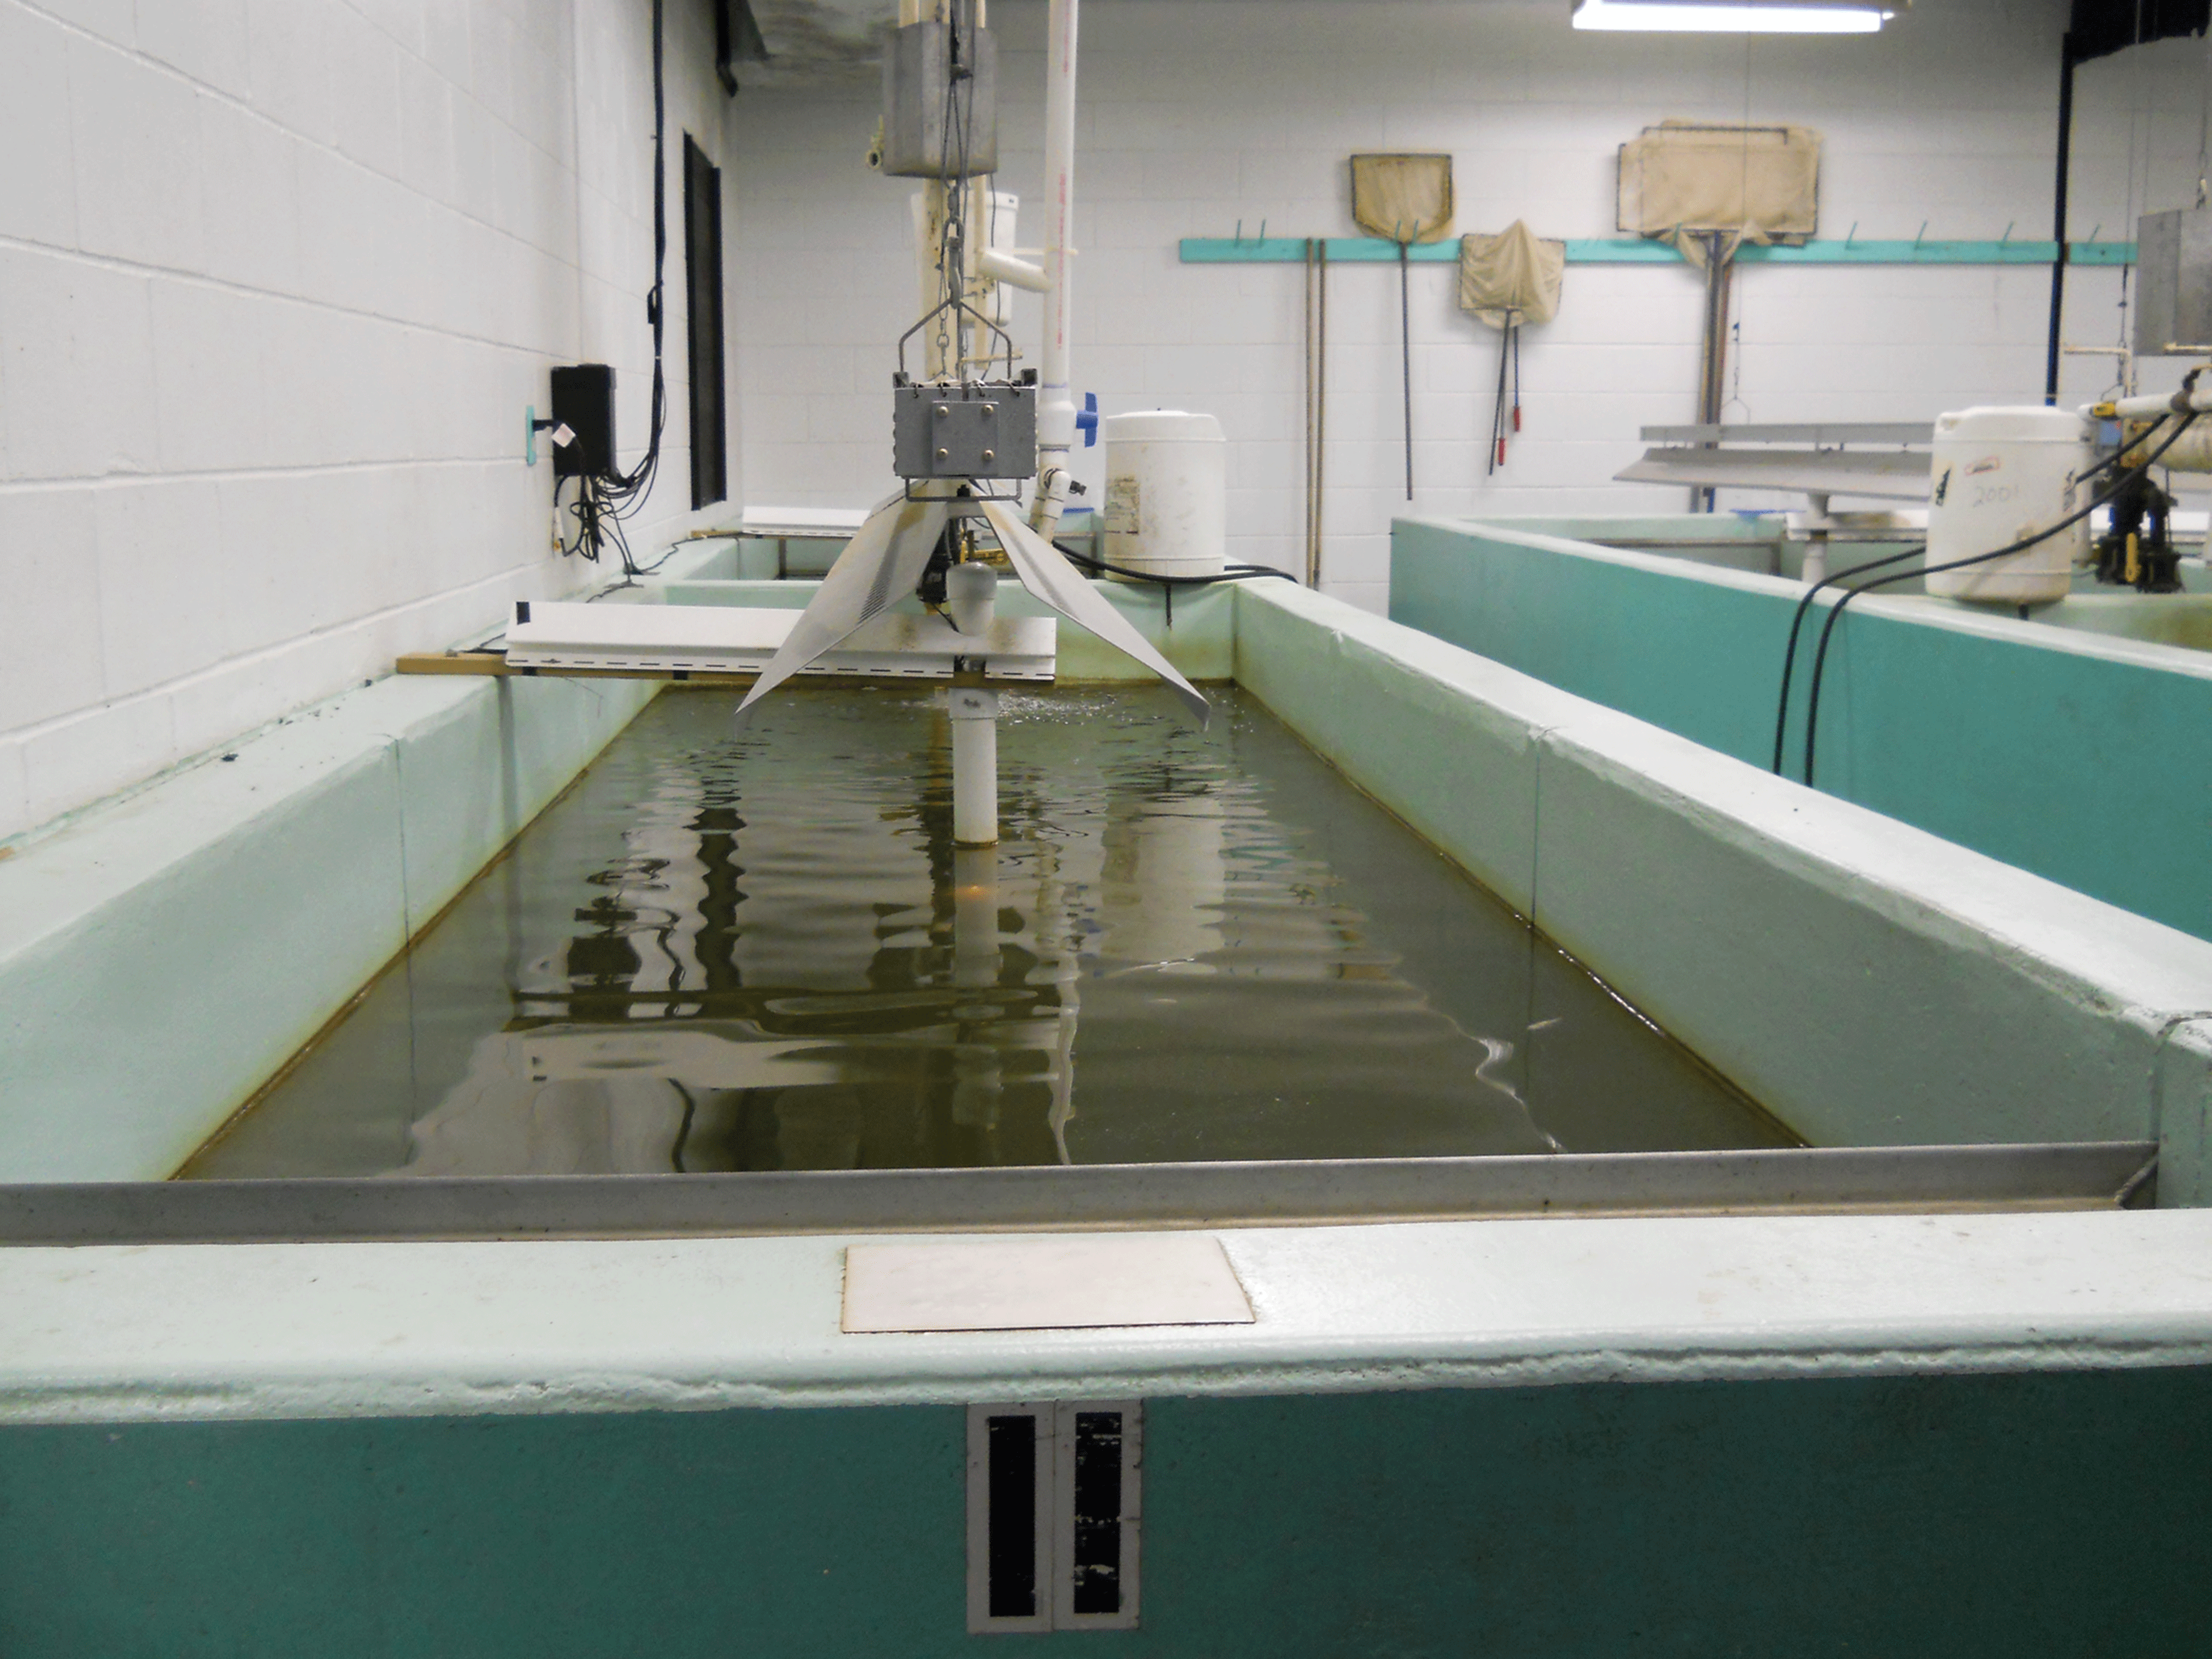 A long fiberglass tank called a raceway is shown, filled mostly with water. At the
                        near end of the raceway, the top of a metal screen is visible that prevents fish from
                        passing to the drain area. In the middle of the raceway, an automated feeder is visible
                        where food is loaded in the top and dispensed down a chute on either side. In the
                        background, other raceways are visible as well as large dip nets for scooping fish
                        hanging on the wall.